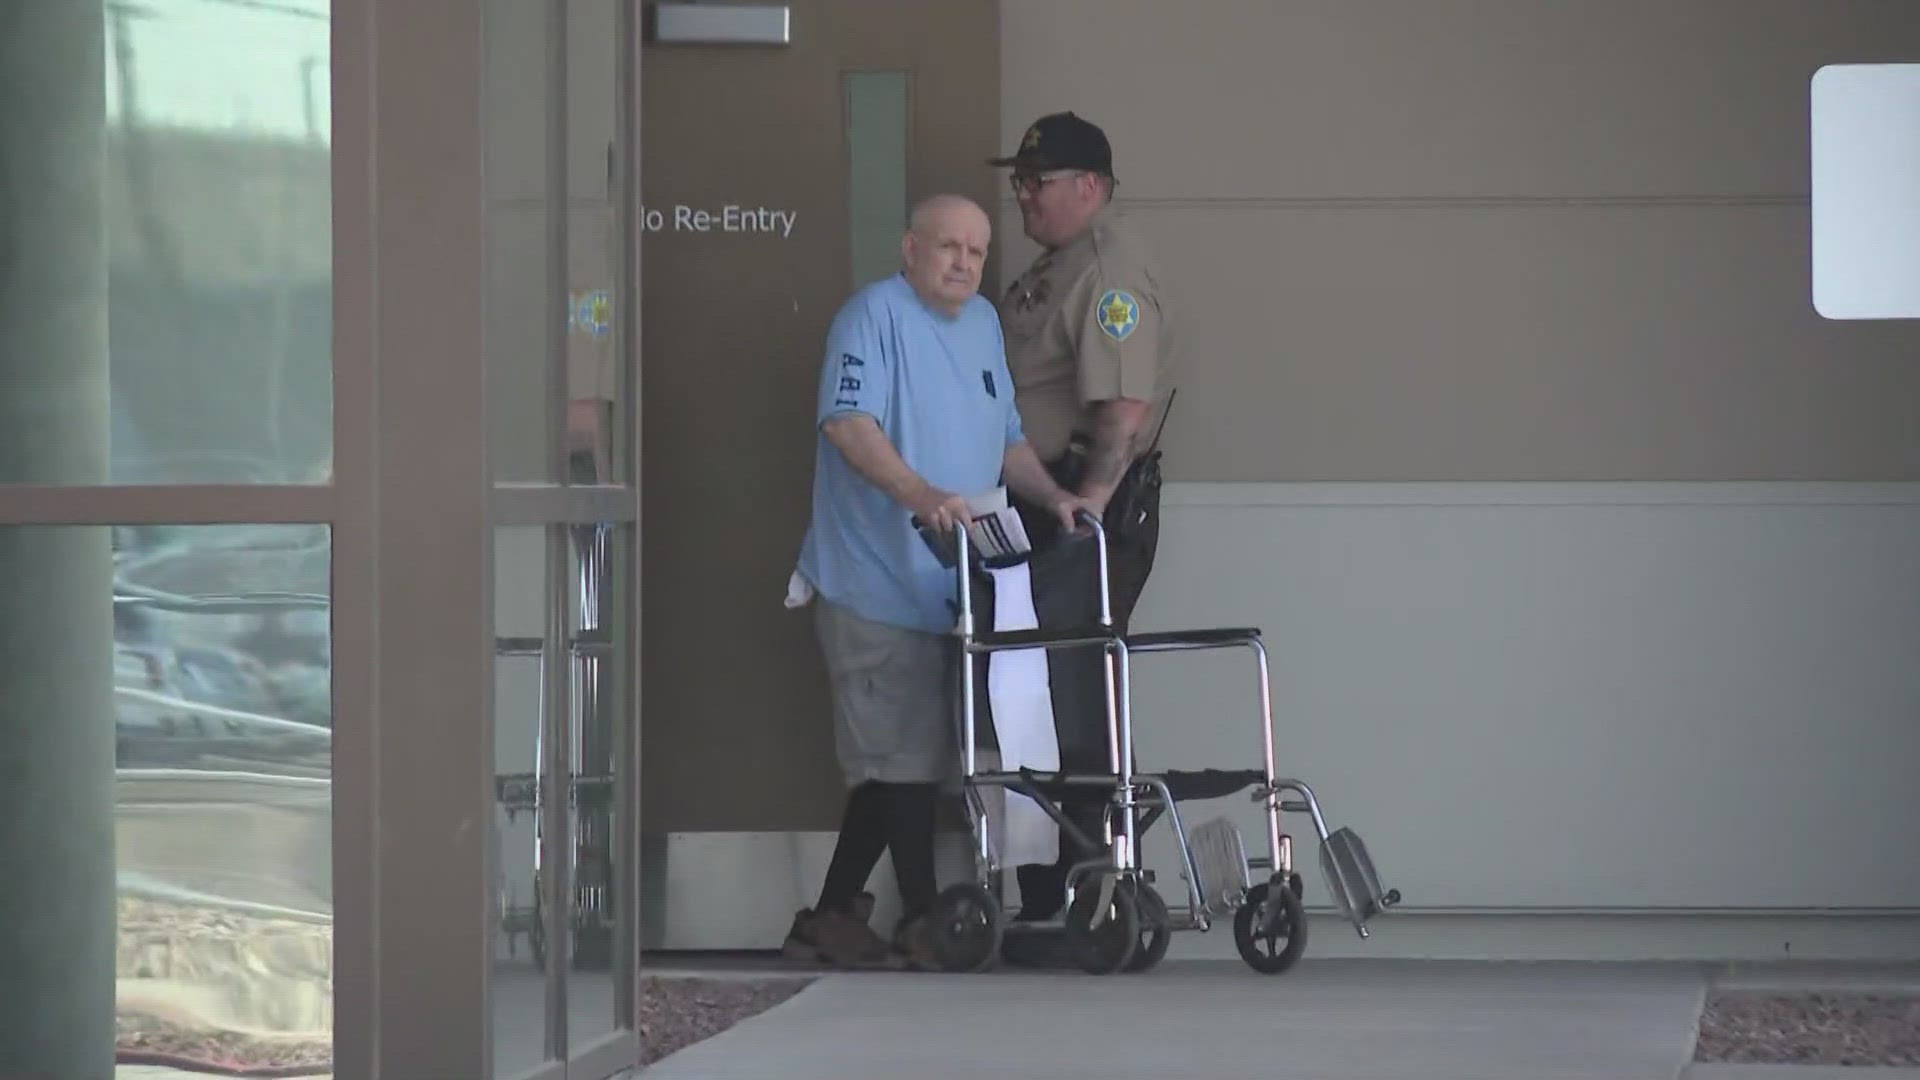 Michael Turney was released from police custody Tuesday morning following an acquittal on Monday. He had been accused of murdering his stepdaughter 22 years ago.